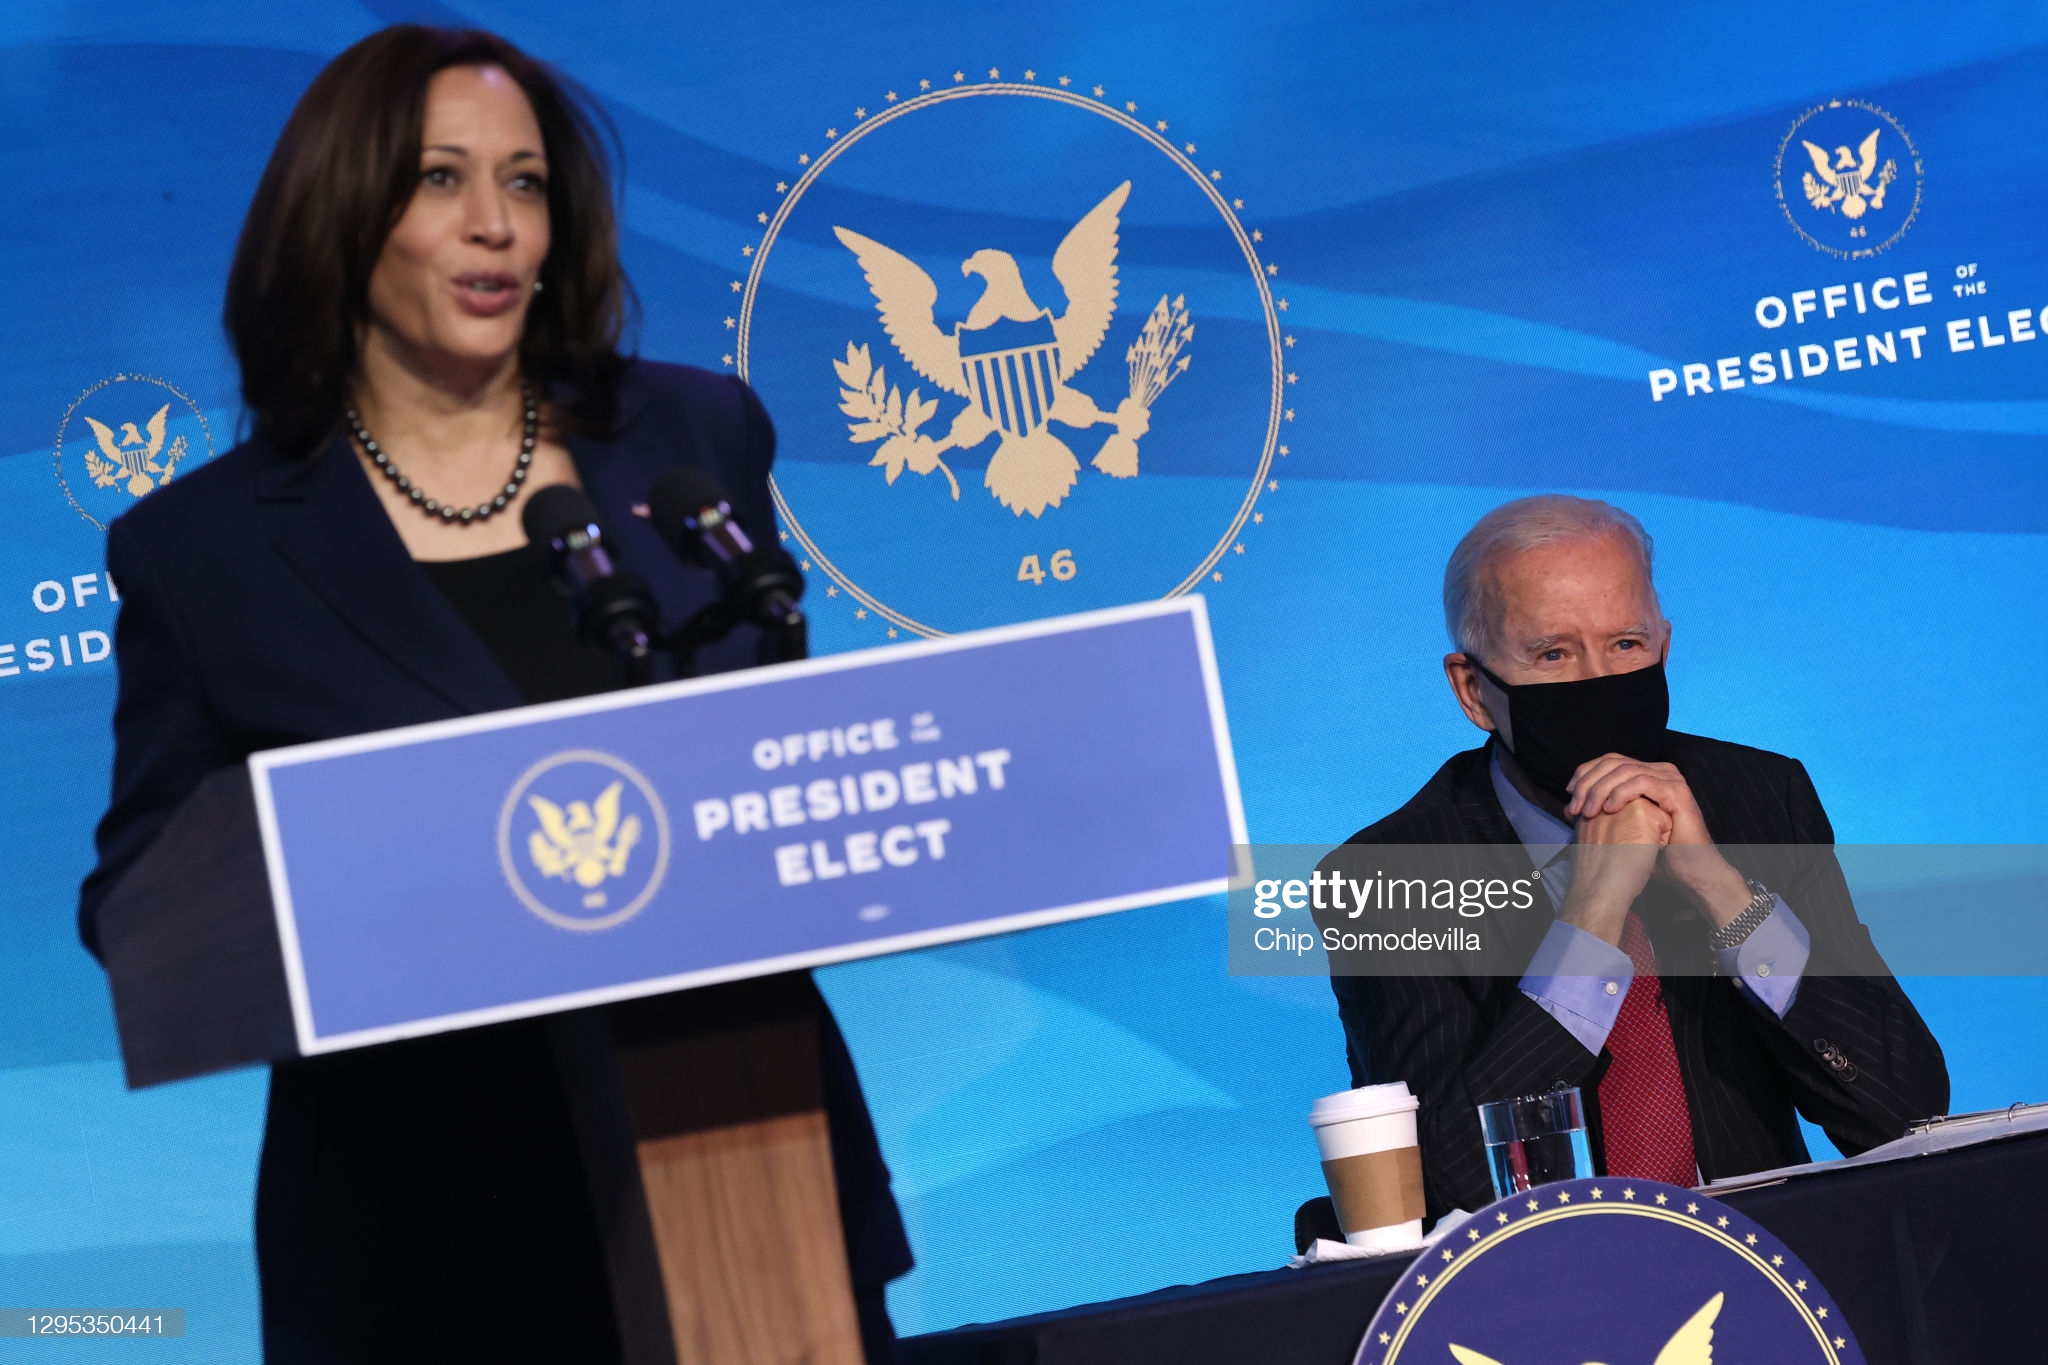 WILMINGTON, DELAWARE - JANUARY 08: U.S. President-elect Joe Biden (R) looks on as U.S. Vice President-elect Kamala Harris (L) delivers remarks after announcing nominees of his cabinet that will round out his economic team, including secretaries of commerce and labor, at The Queen theater on January 08, 2021 in Wilmington, Delaware. Biden announced he is nominating Rhode Island Gov. Gina Raimondo as his commerce secretary, Boston Mayor Martin J. Walsh his labor secretary and Isabel Guzman, a former Obama administration official, as head of the Small Business Administration. (Photo by Chip Somodevilla/Getty Images)